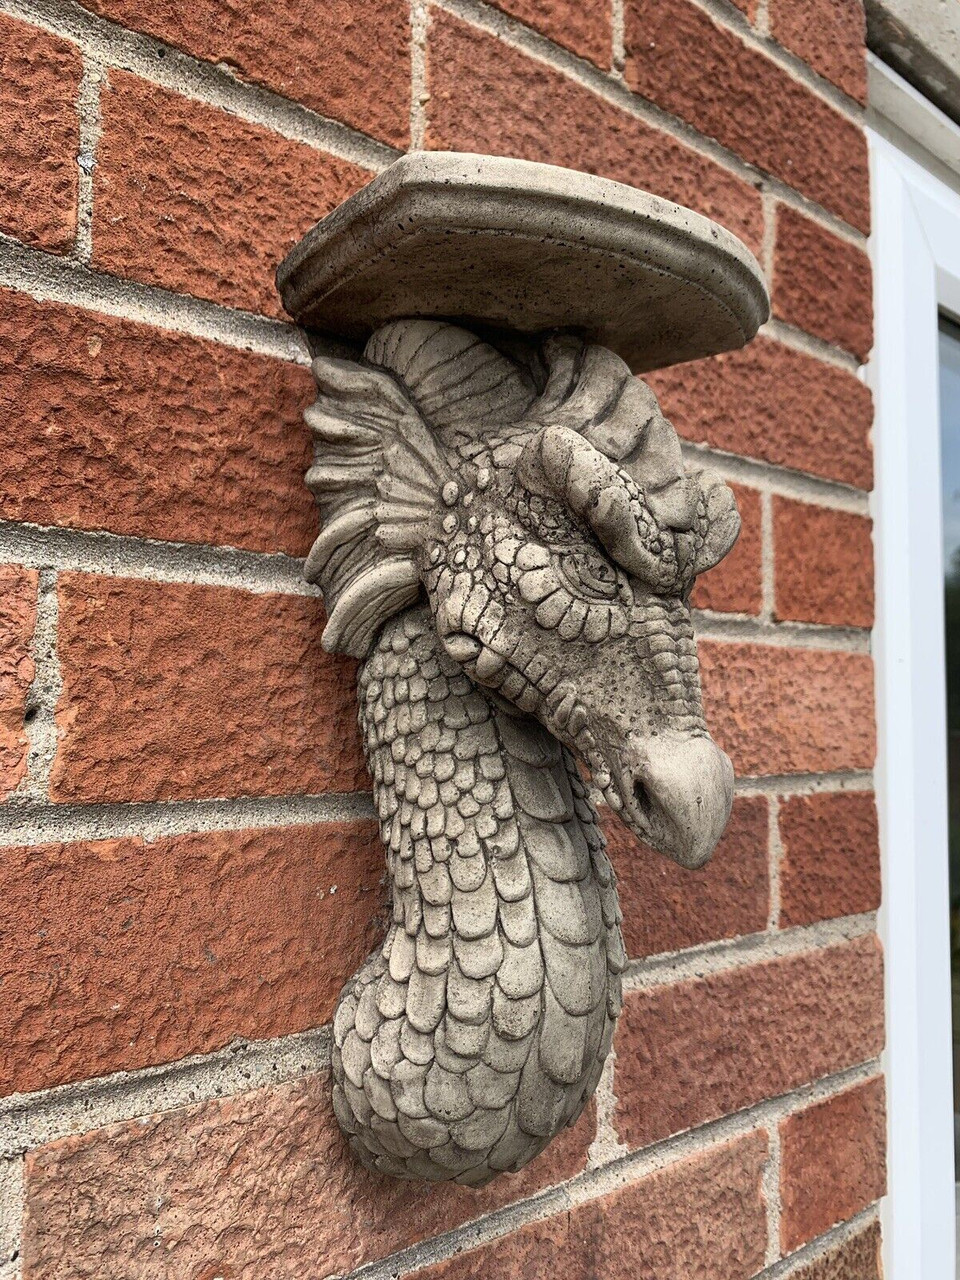 STONE GARDEN DETAILED DRAGON SCONCE CANDLE SHELF WALL HANGING X 2 ORNAMENT